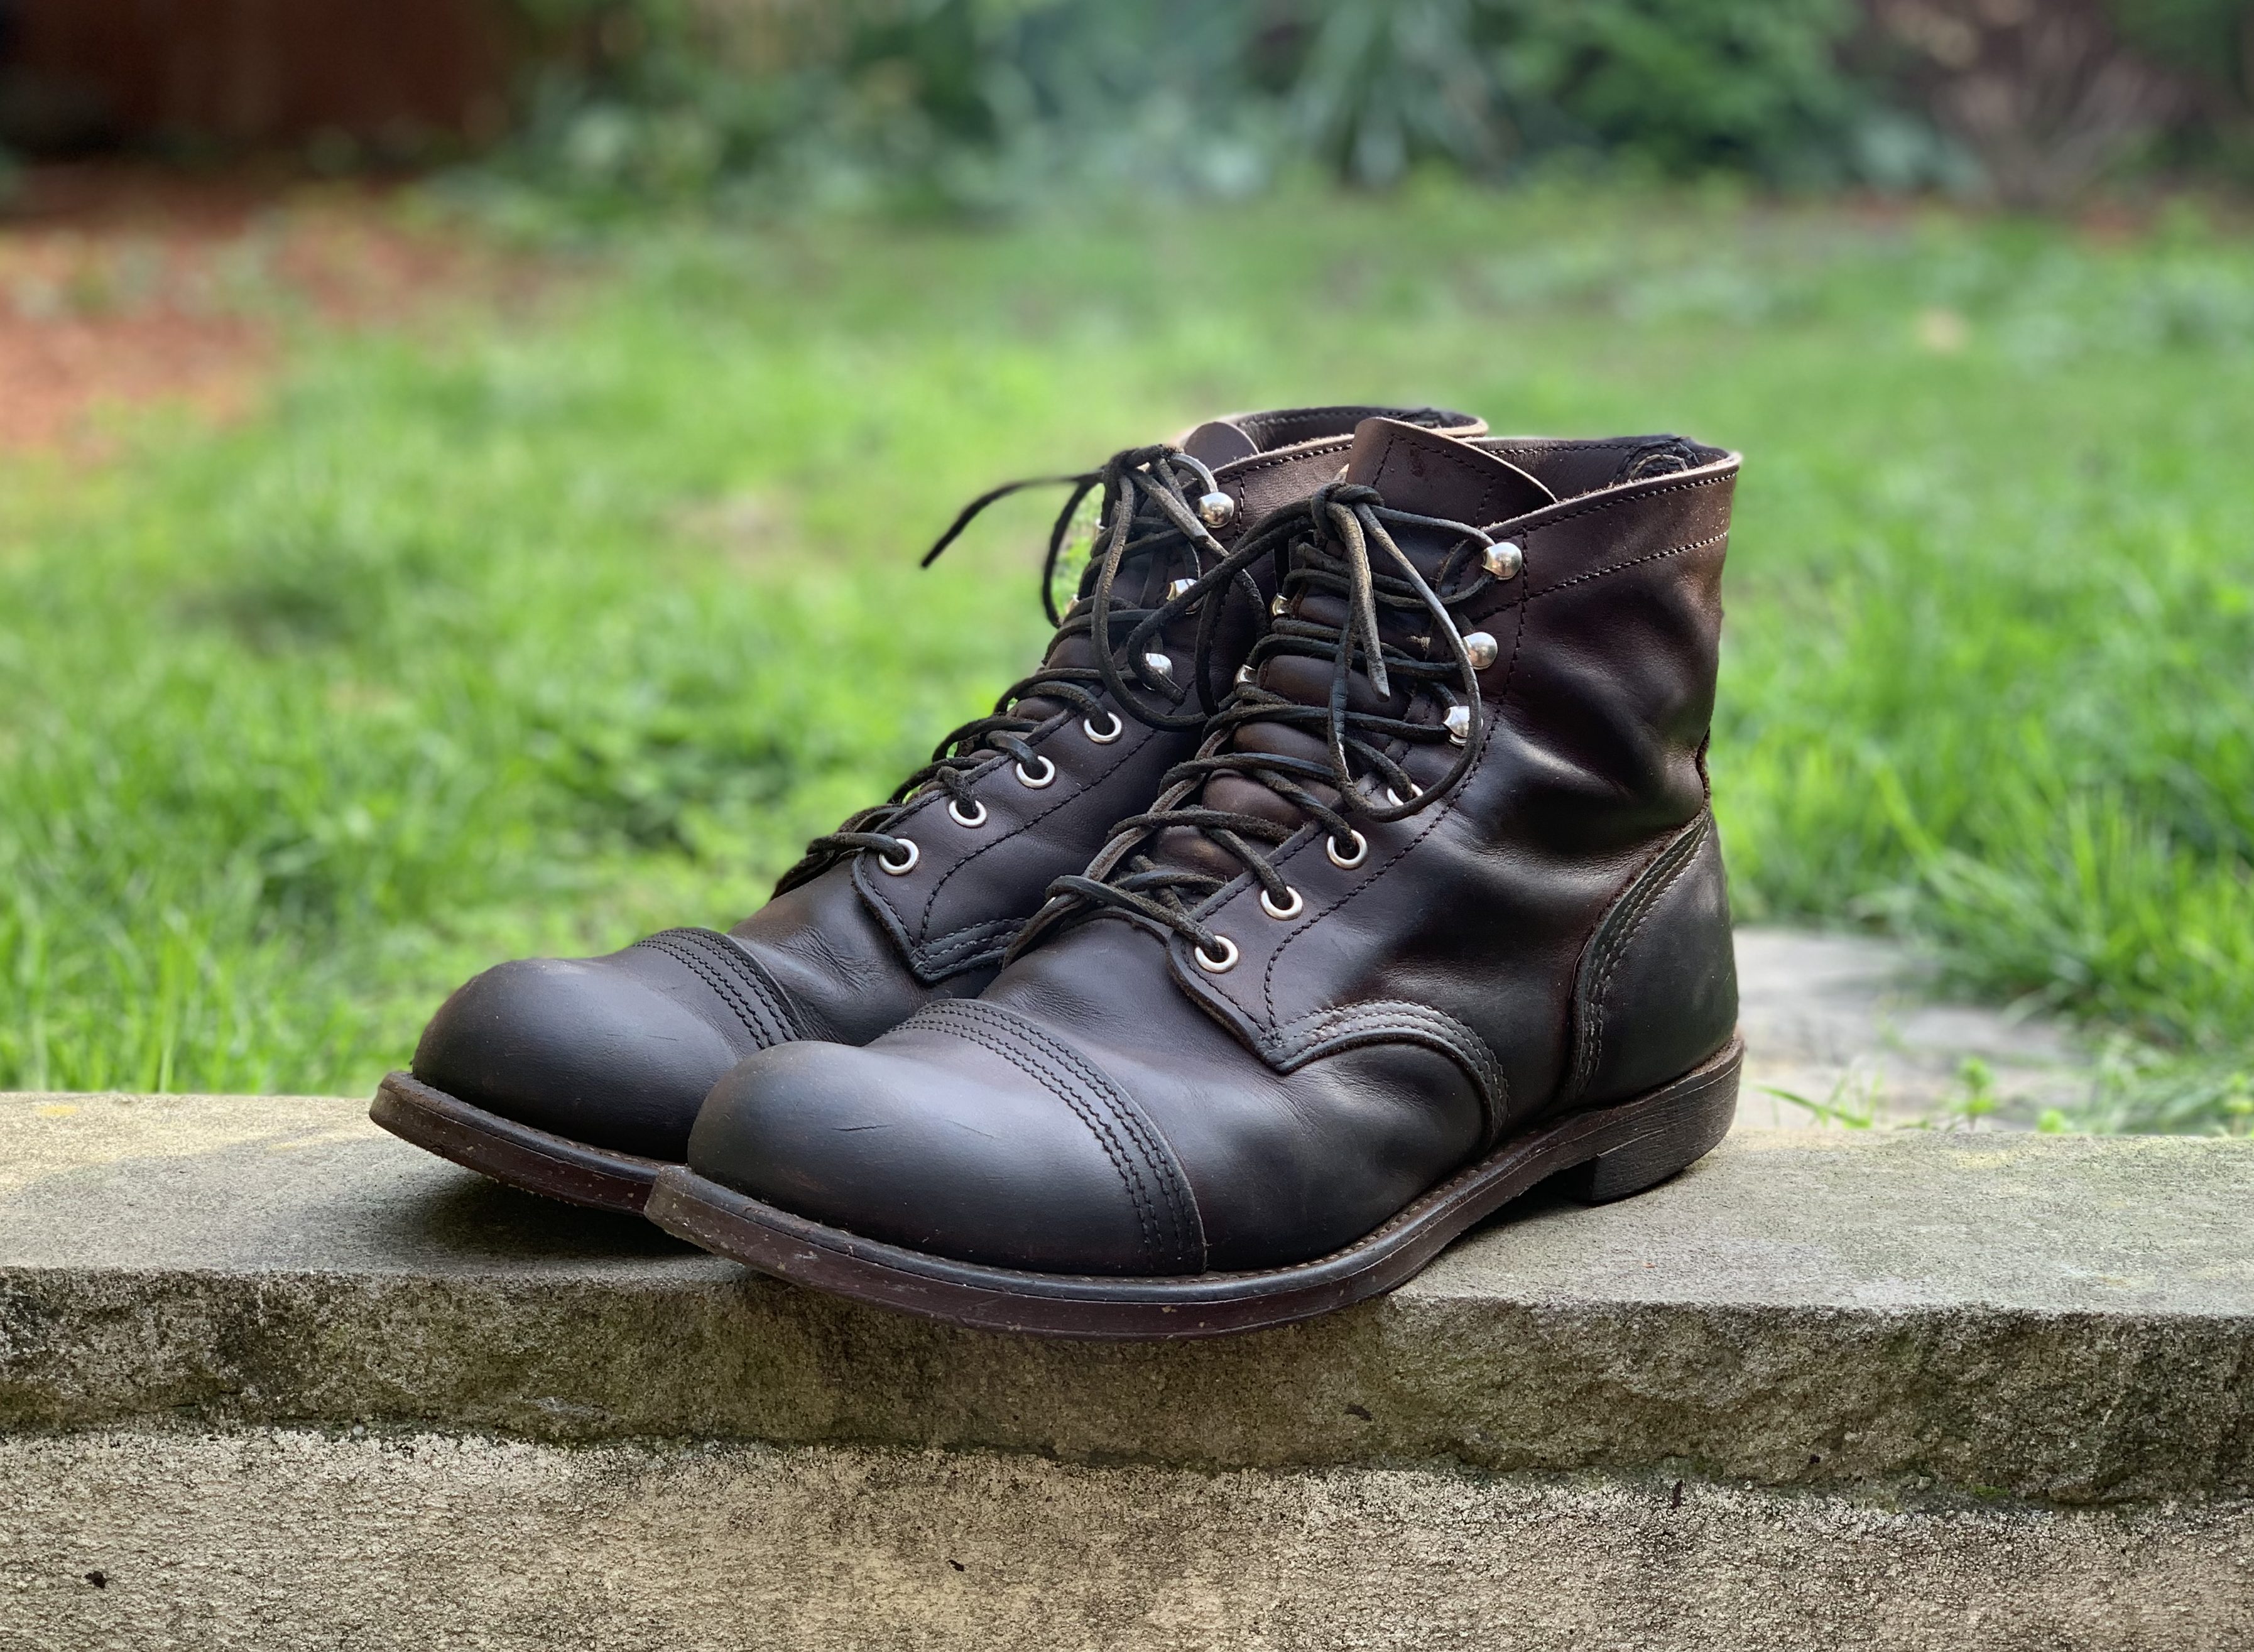 Buy > redwing casual shoes > in stock